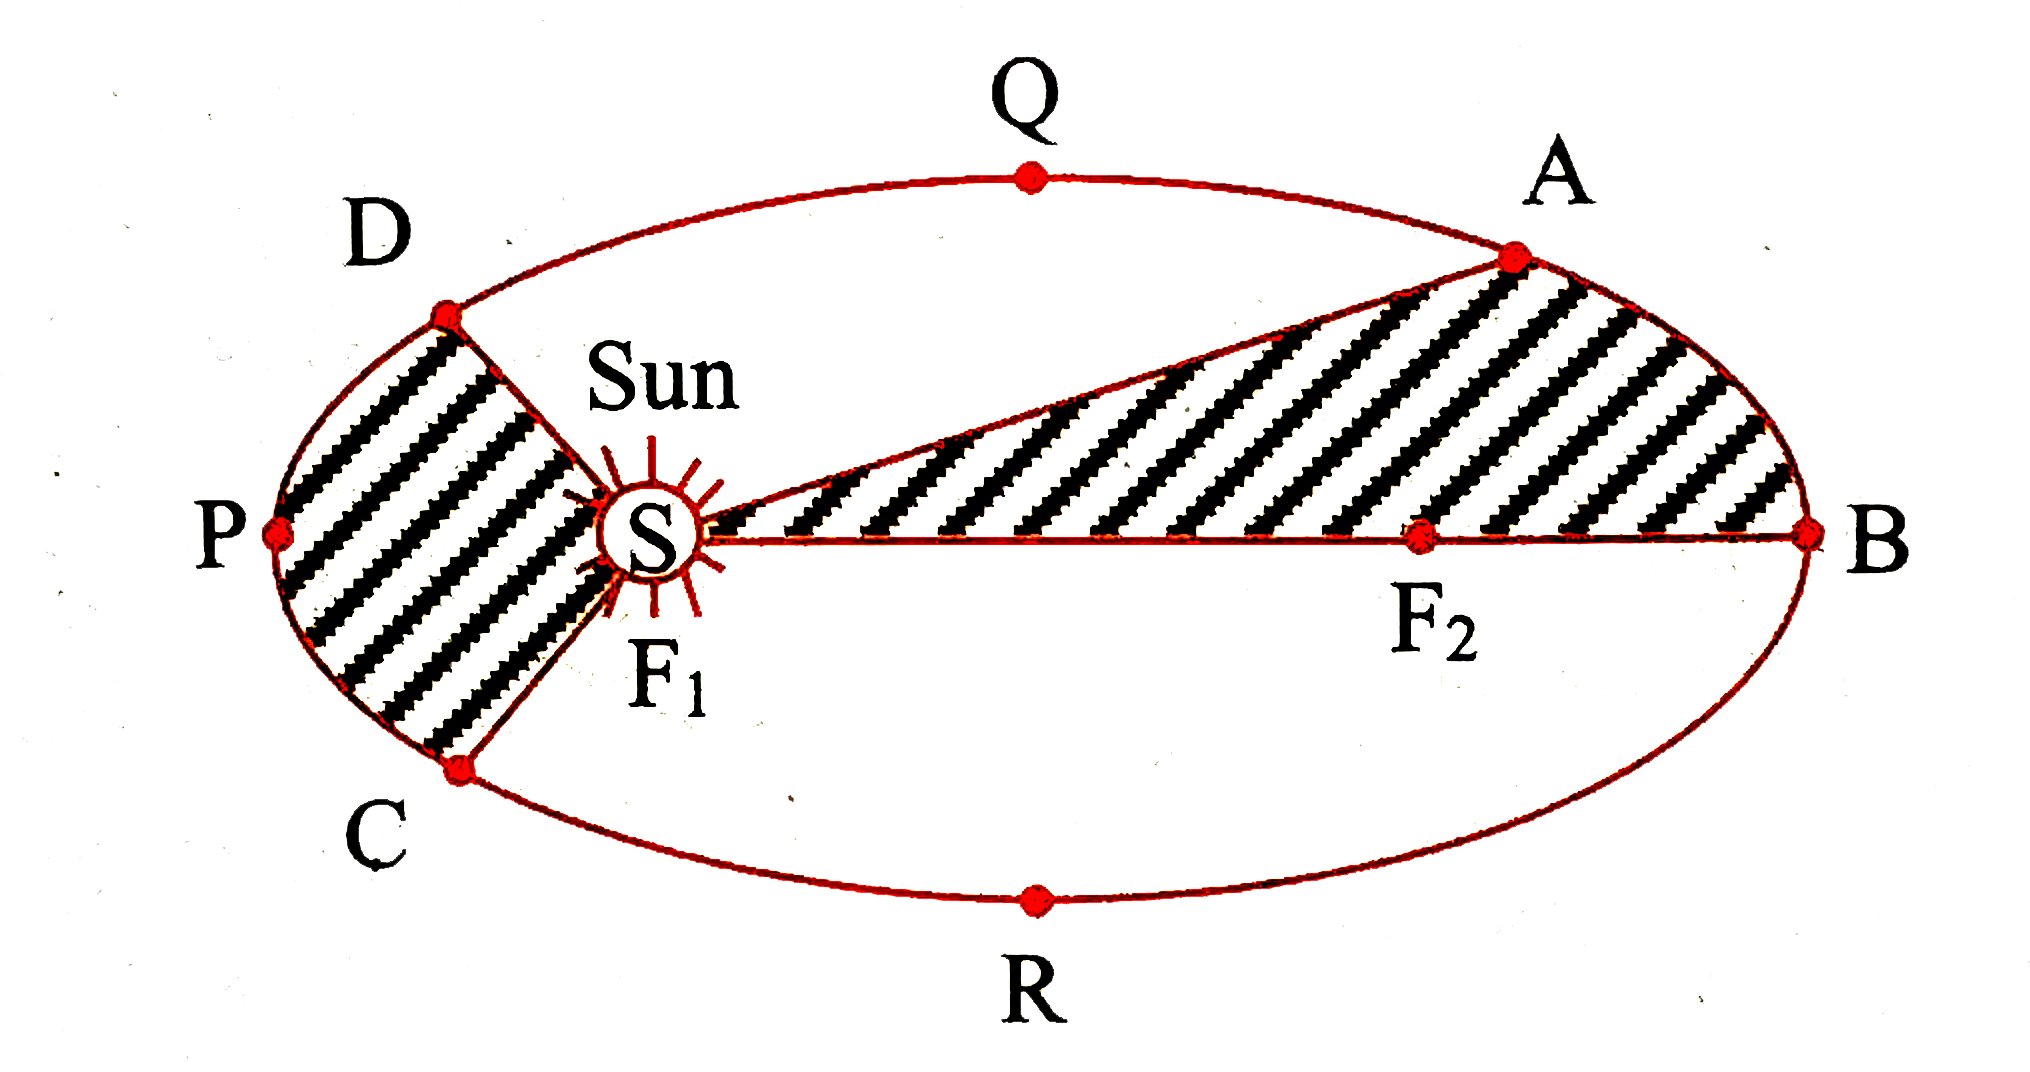 The figure shows the elliptical orbit of a planet about the sun S. An ellipse is the curve obtained when a cone is cut by an inclined plane. It has two focal points. The sum of the distances to the two focal points from every point on the curve is constant. F1